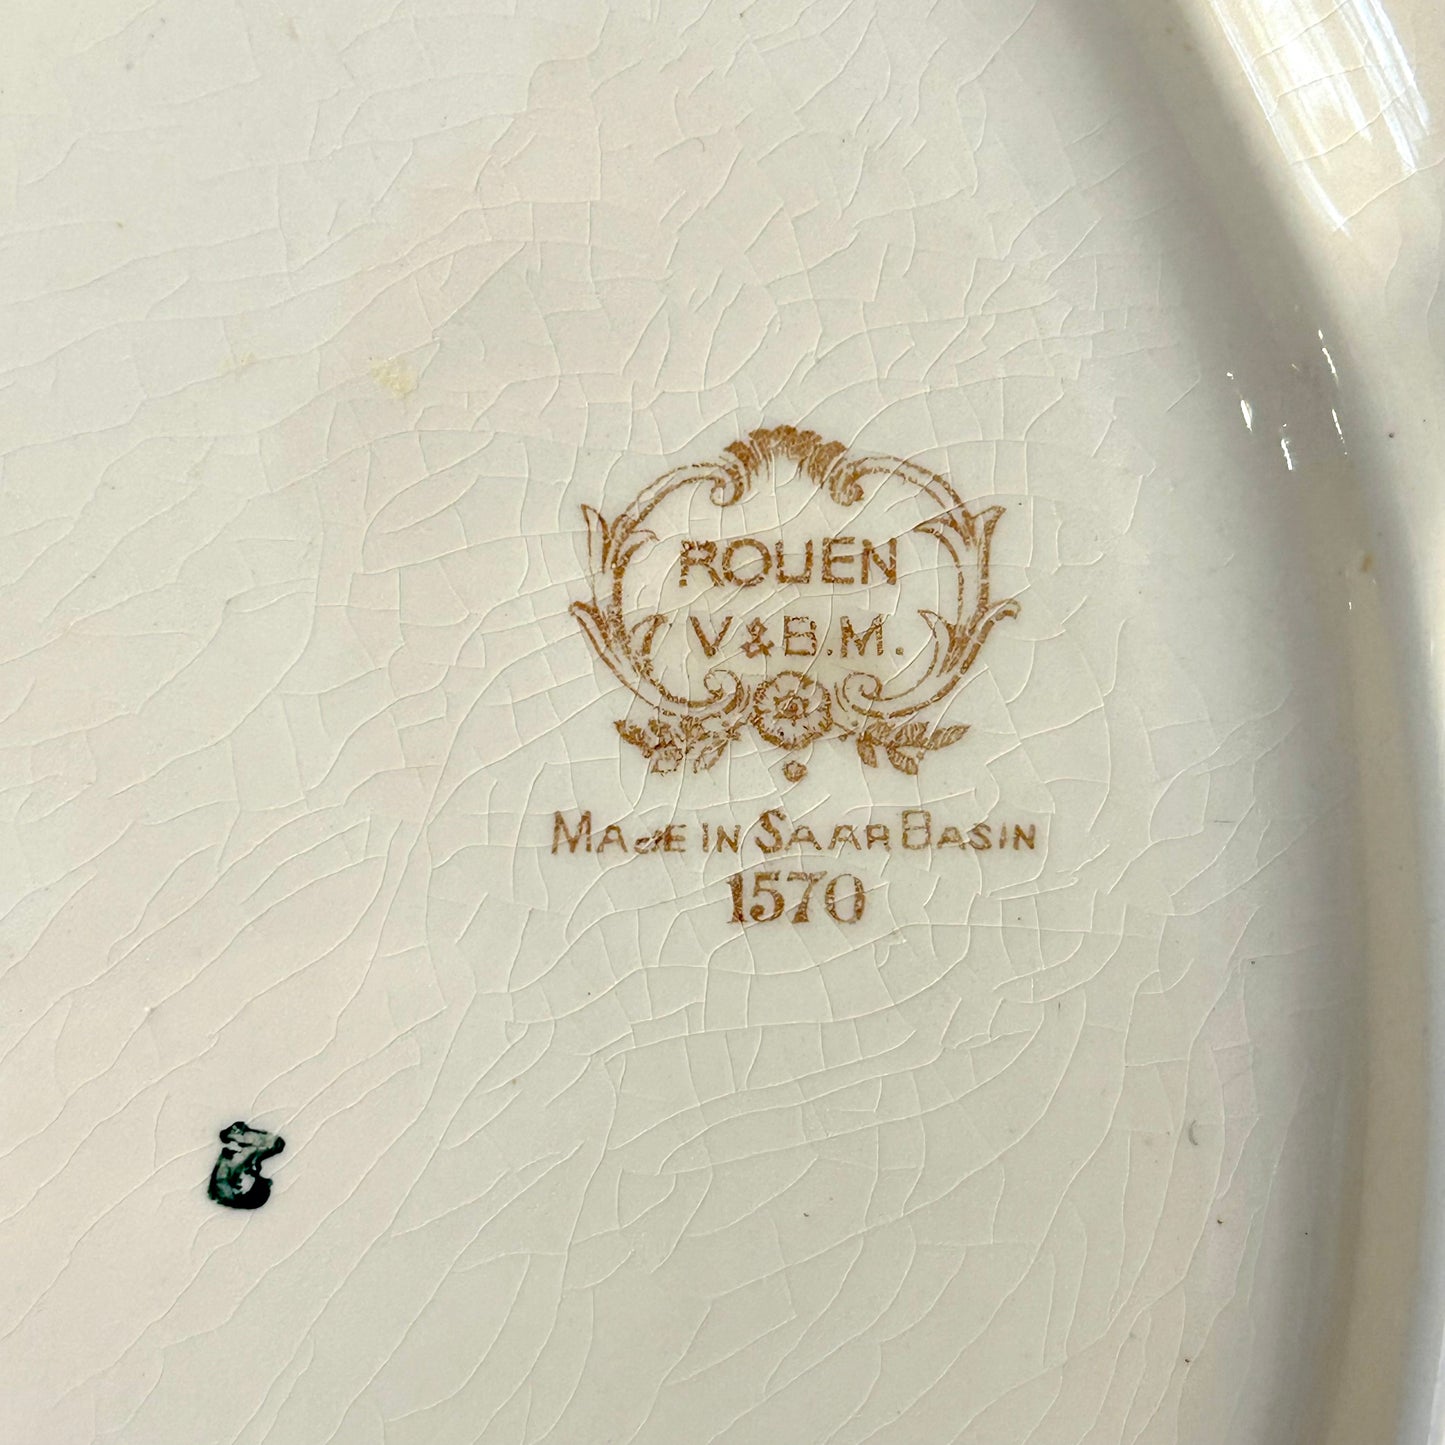 Antique VILLEROY & BOCH METTLACH "Rouen" Grill Plate.  RARE! 1920-35. 3 section dinner plate